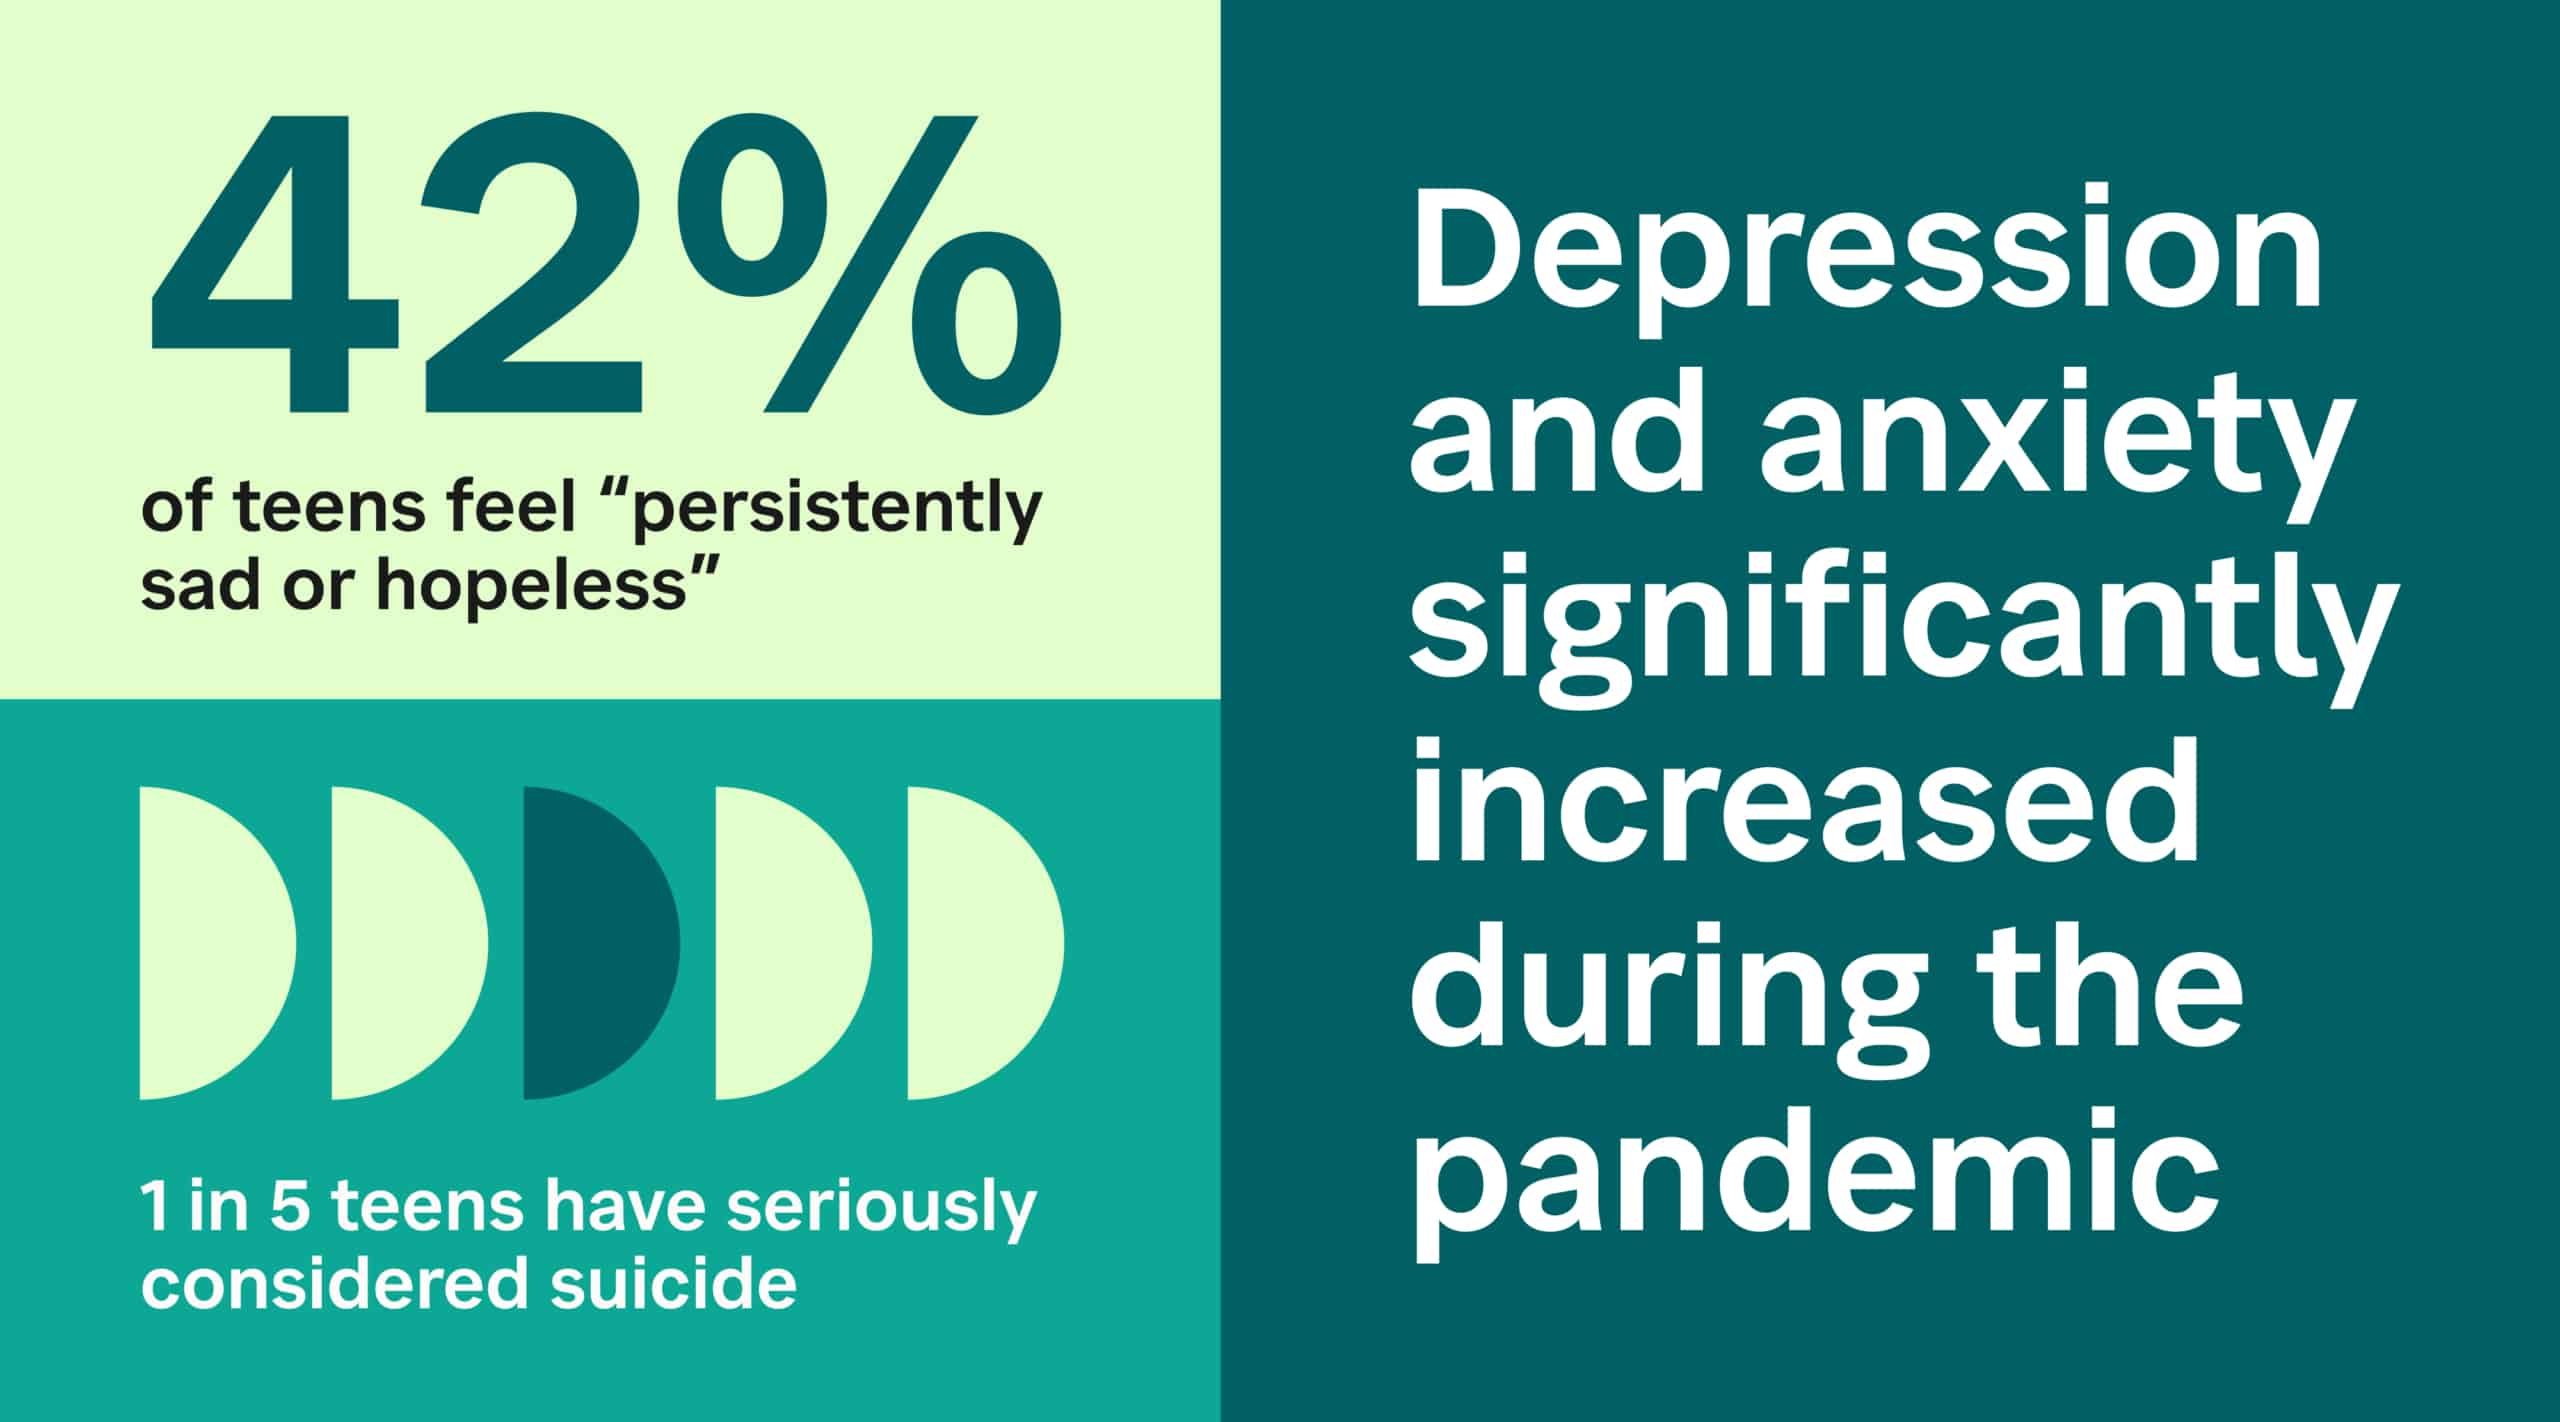 Stat graphic illustrating data on teen sadness, hopelessness, depression, anxiety, and suicide rate.